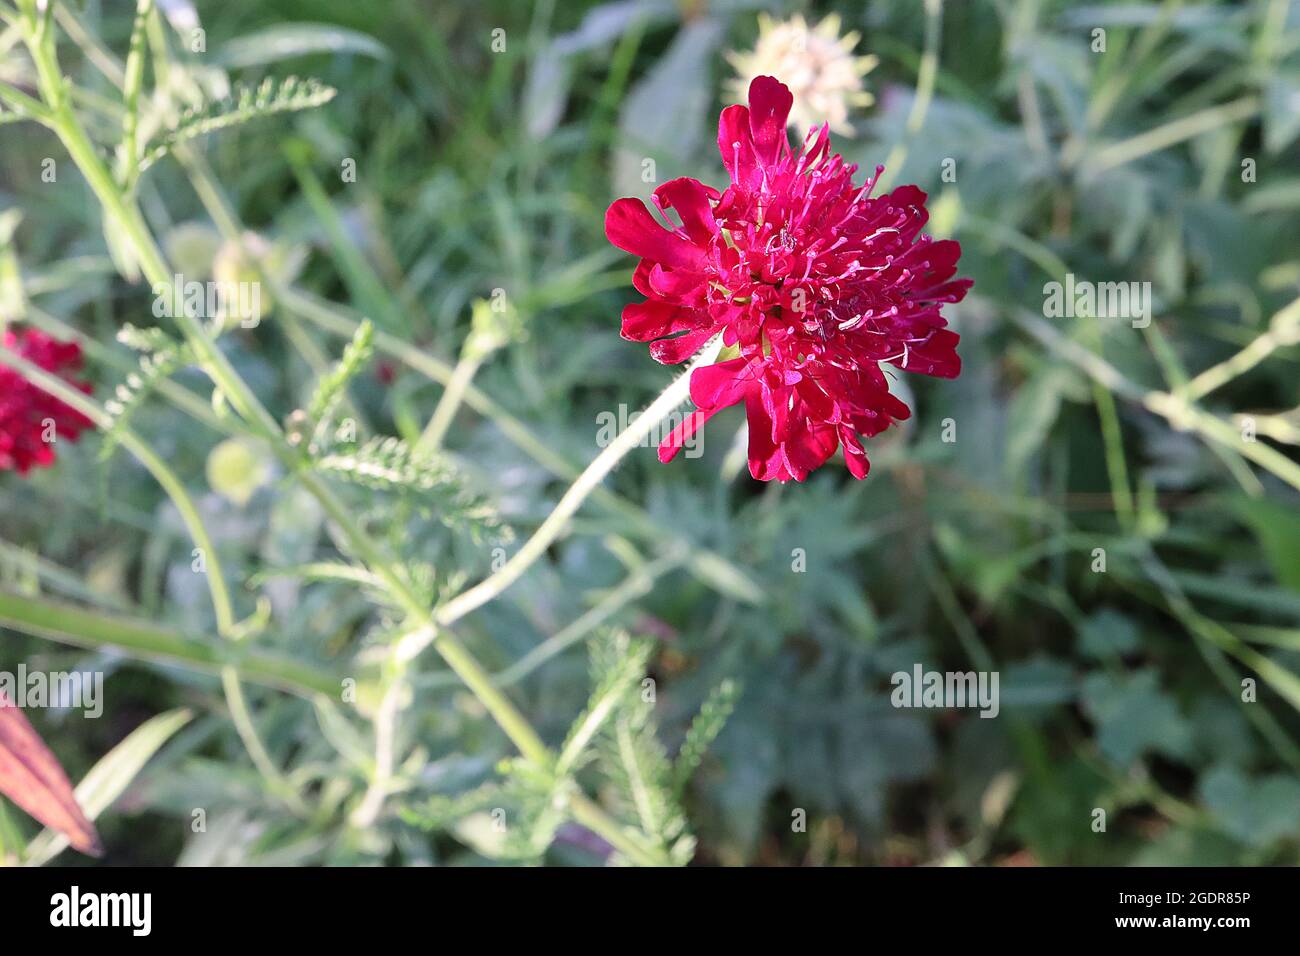 macedonica 'Red Knight' Macedonian Red Knight – crimson red flowers with pincushion centre of ray florets, England, UK Stock Photo - Alamy